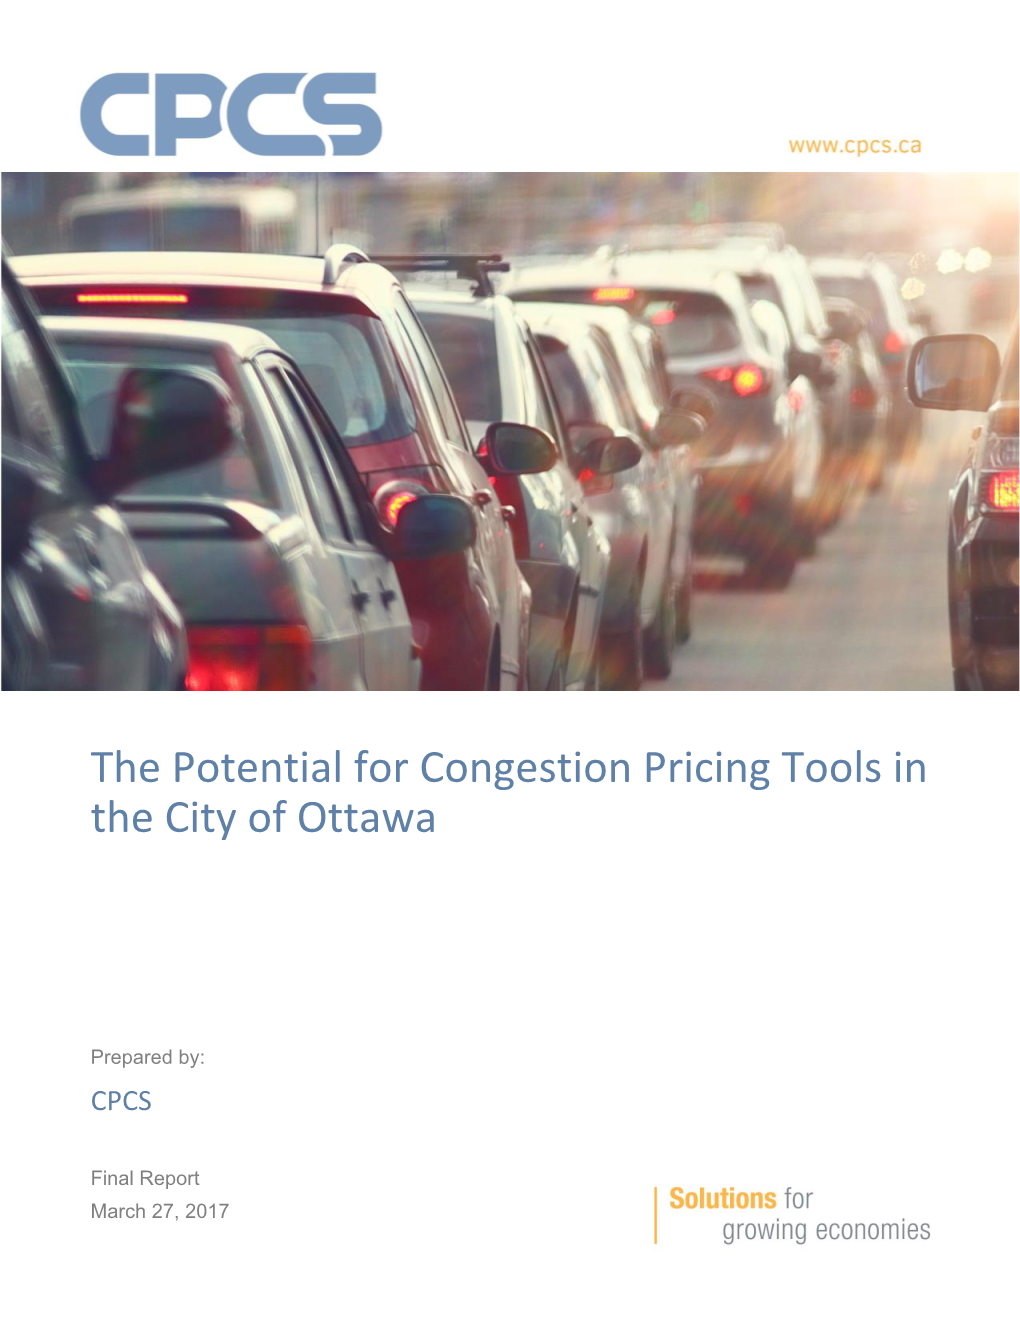 The Potential for Congestion Pricing Tools in the City of Ottawa